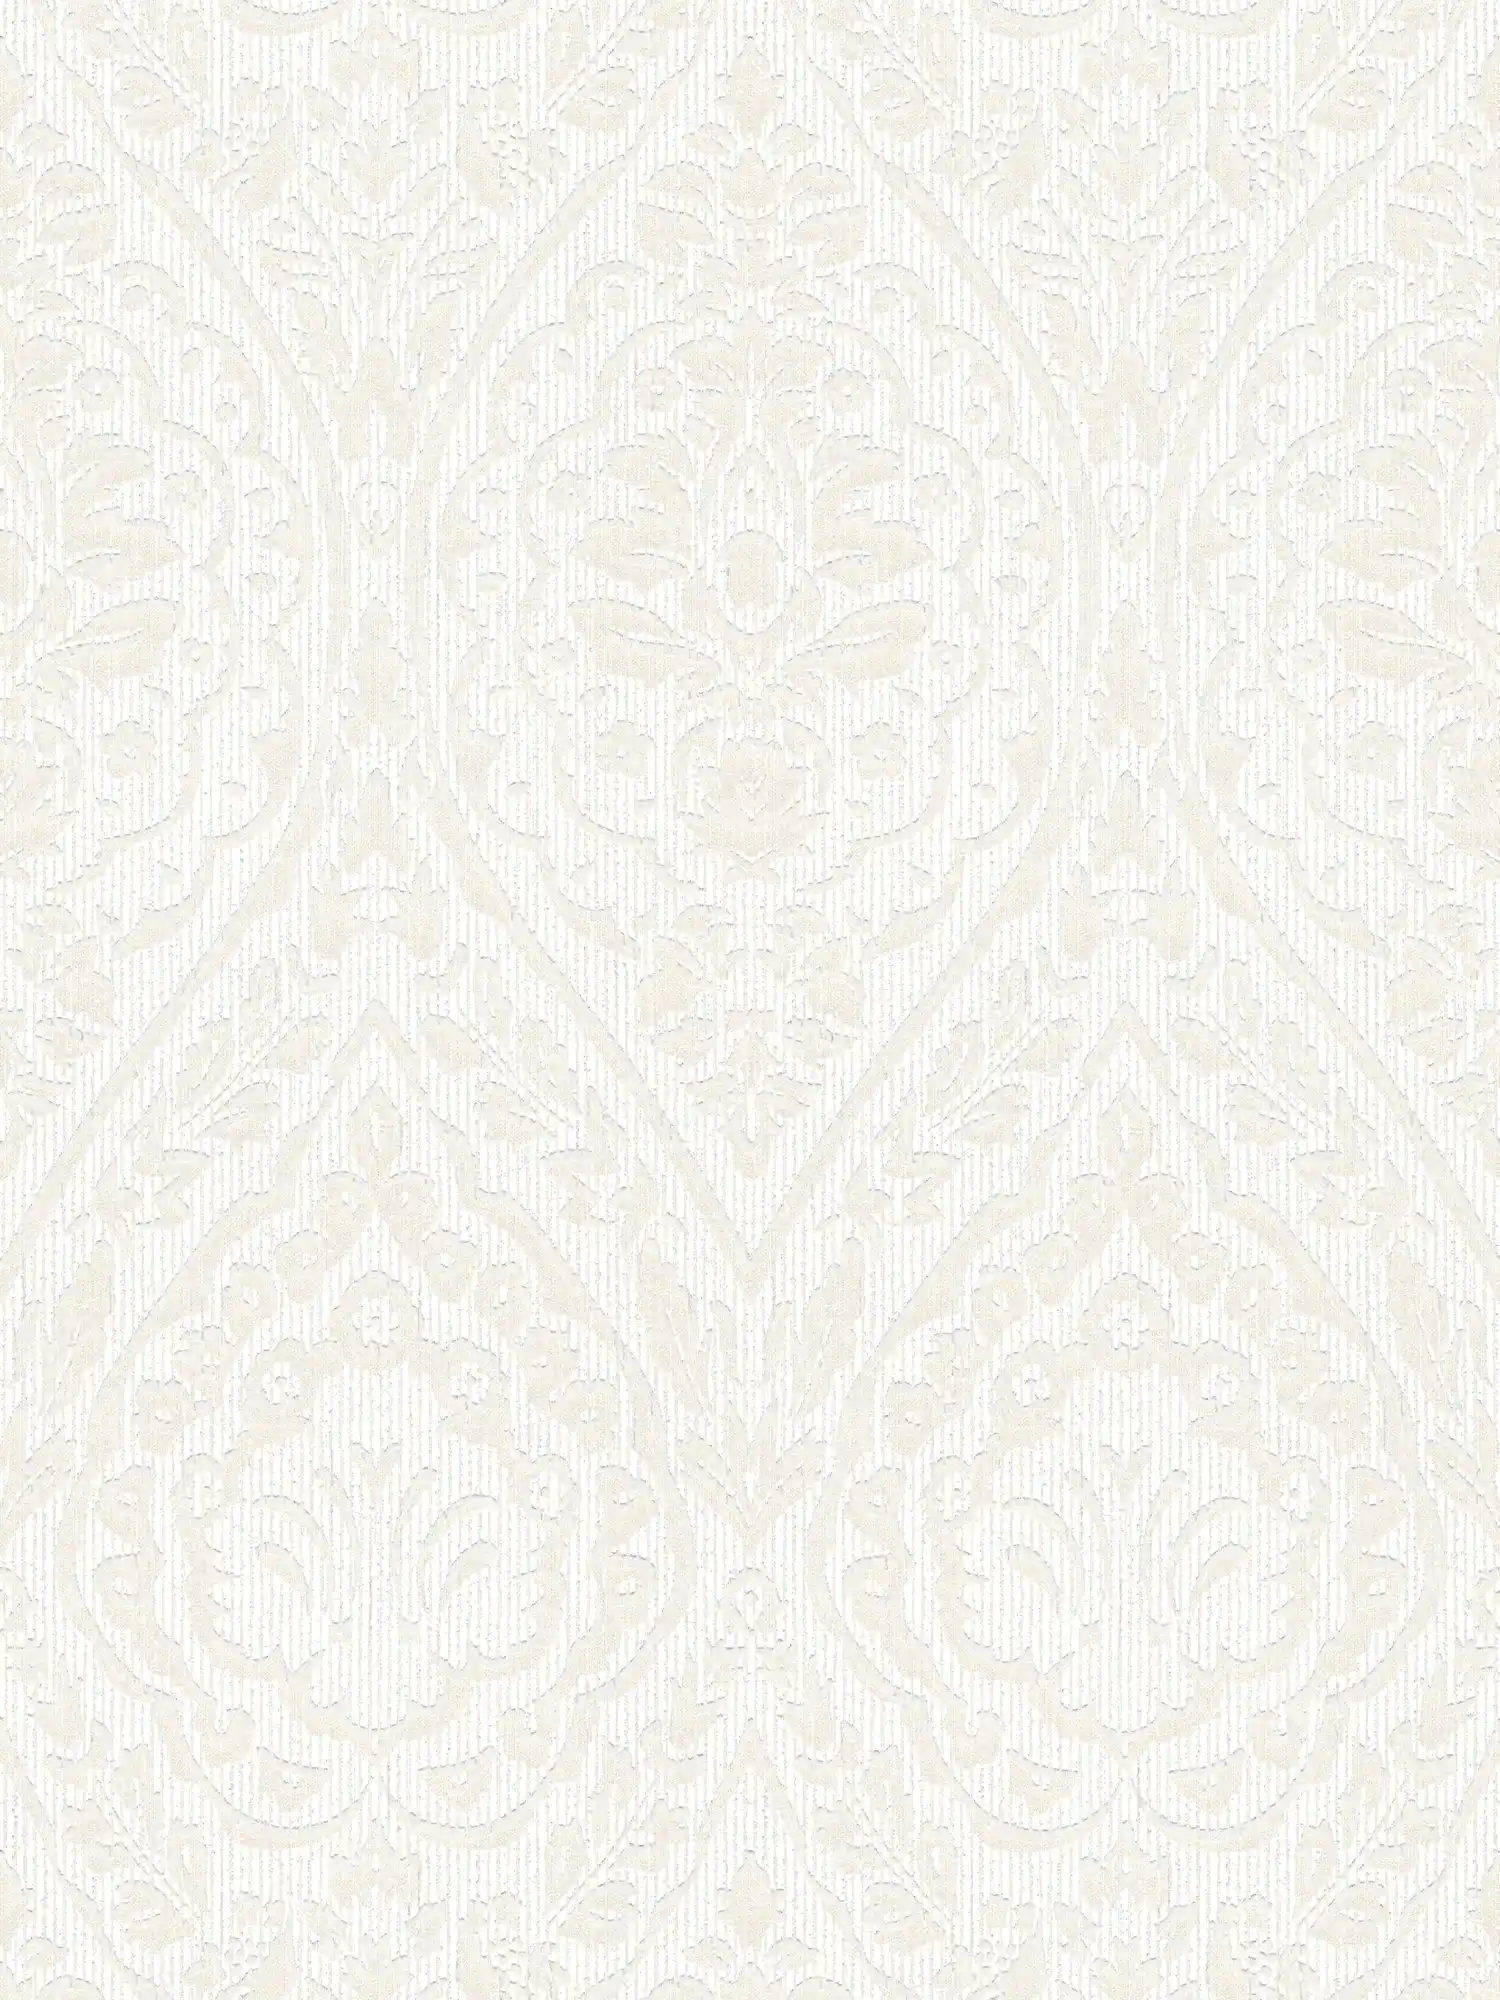 Textured wallpaper with floral ornament pattern in colonial style - white
